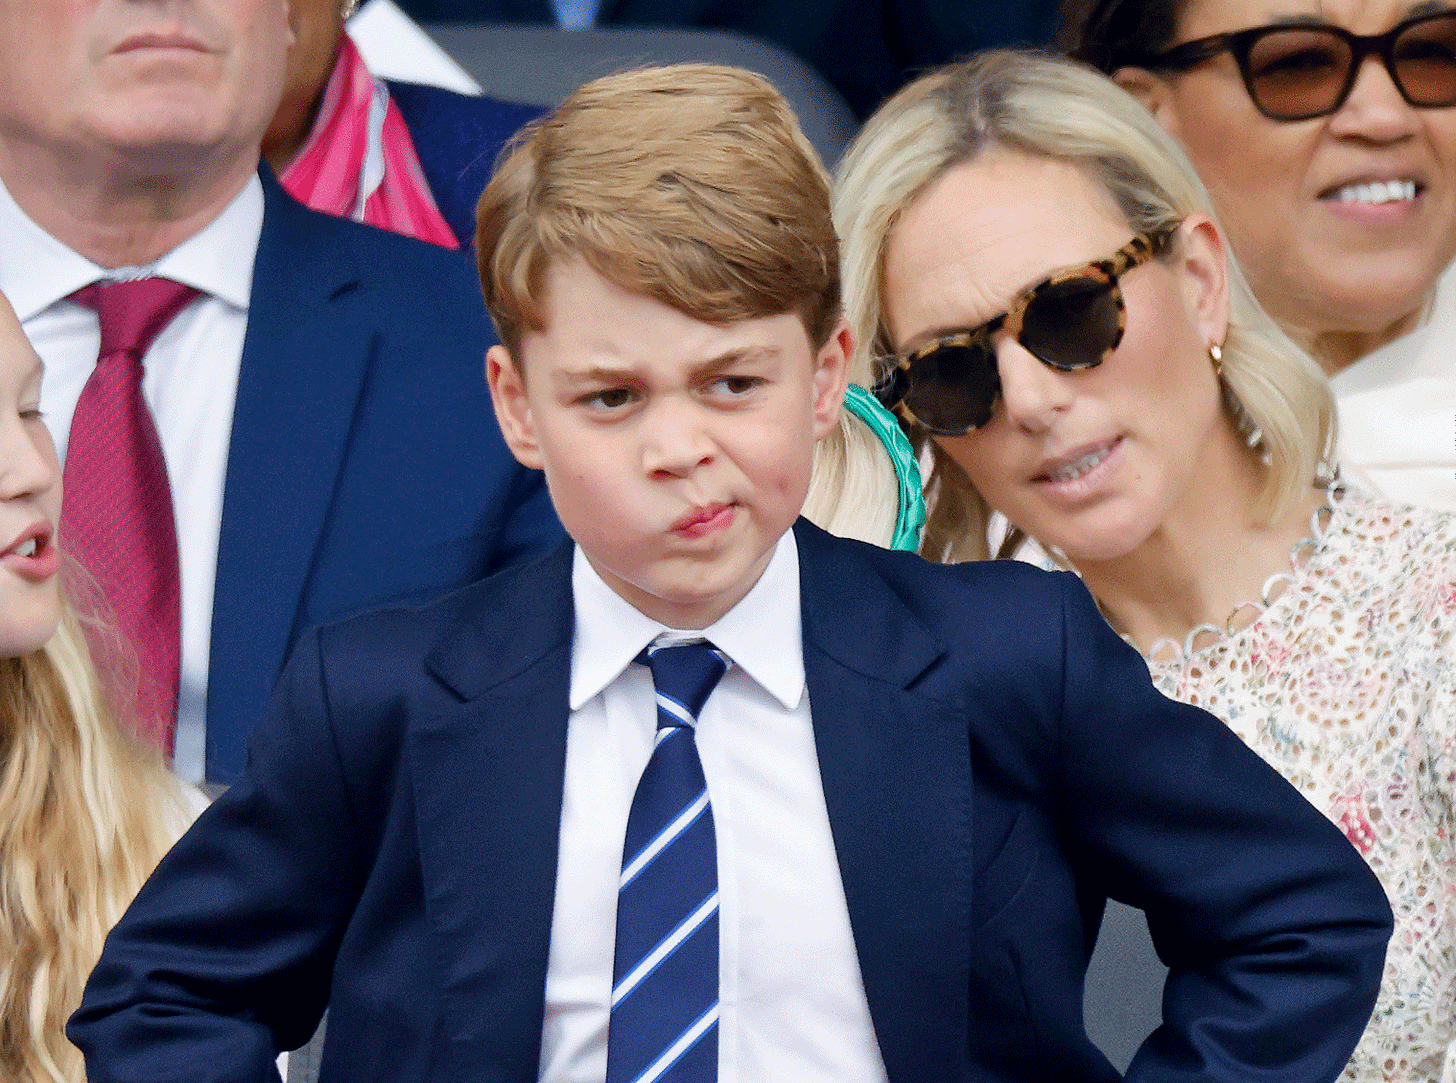 prince george looking quizzical wearing a suit